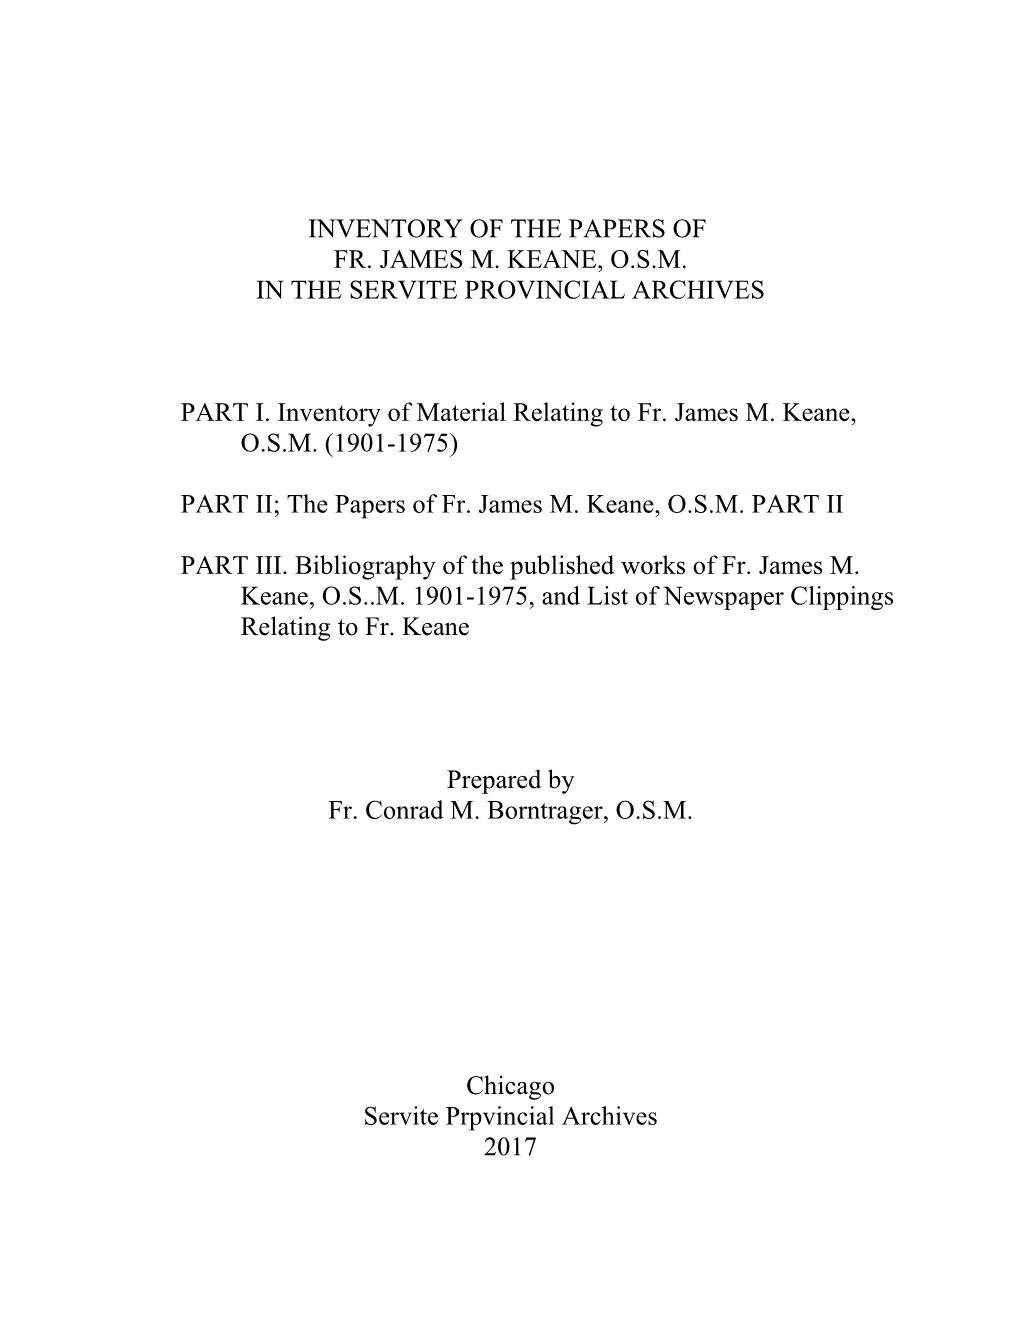 Inventory of the Papers of Fr. James M. Keane, O.S.M. in the Servite Provincial Archives